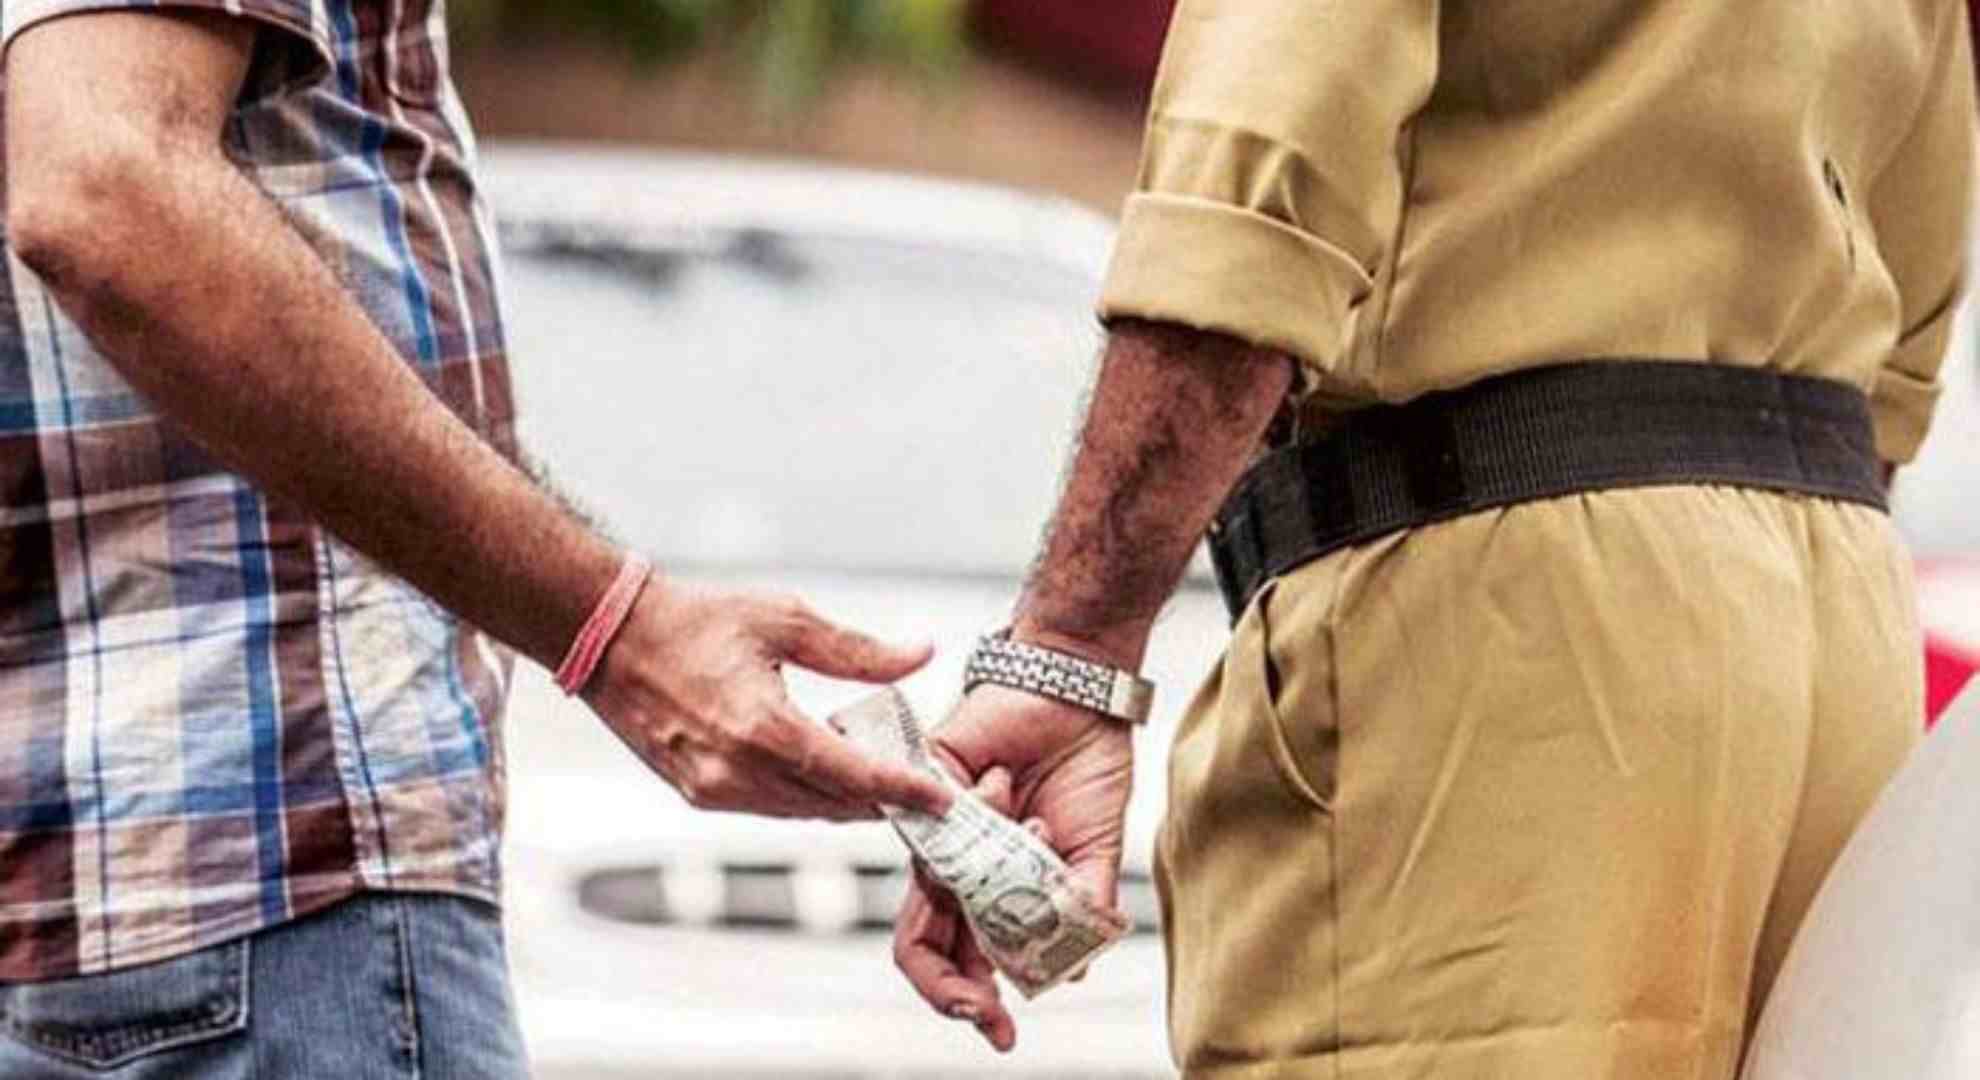 Delhi Police Bribery Scandal: Officers Accepting Payments In Instalments